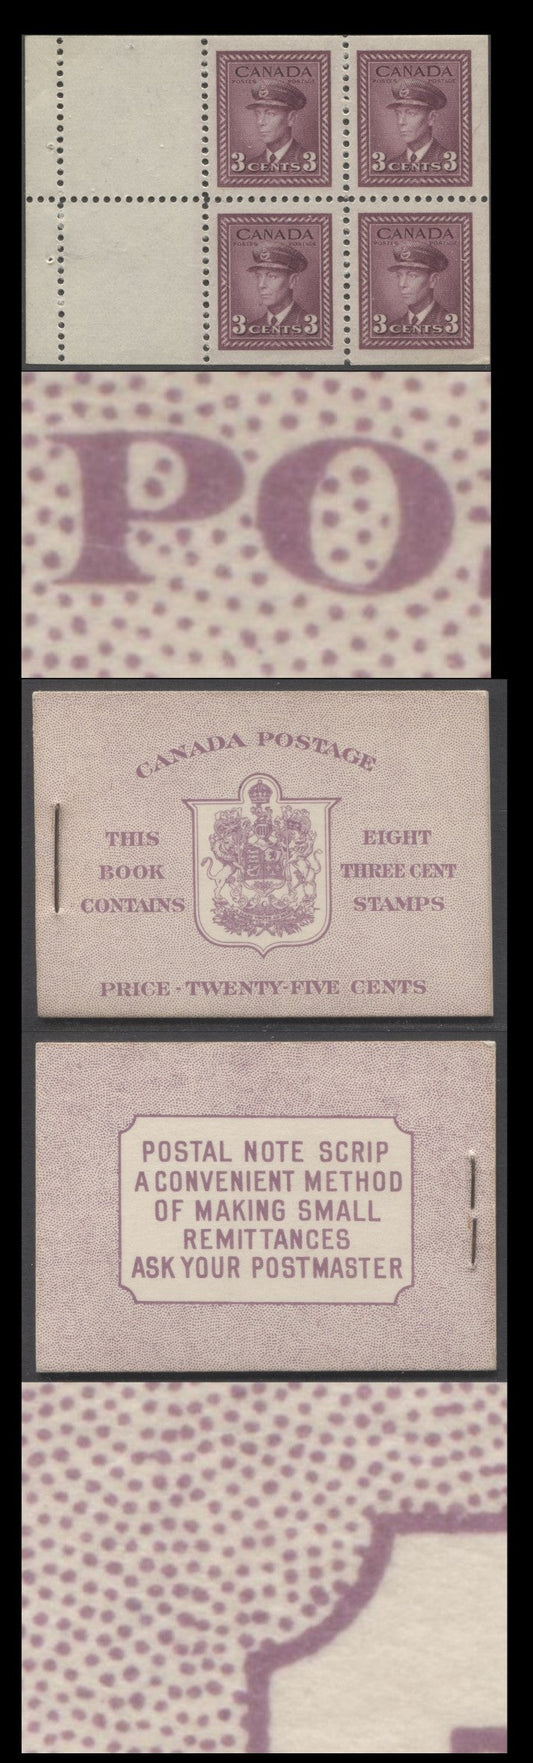 Lot 90 Canada #BK35dE 1942-1947 War Issue, A Complete 25c English Booklet, 2 Panes Of 4+2 Labels 3c Rose Violet, Front Cover IIe, Back Cover Caii, Type II, 7c & 5c Rates Page, 1,201,000 Issued